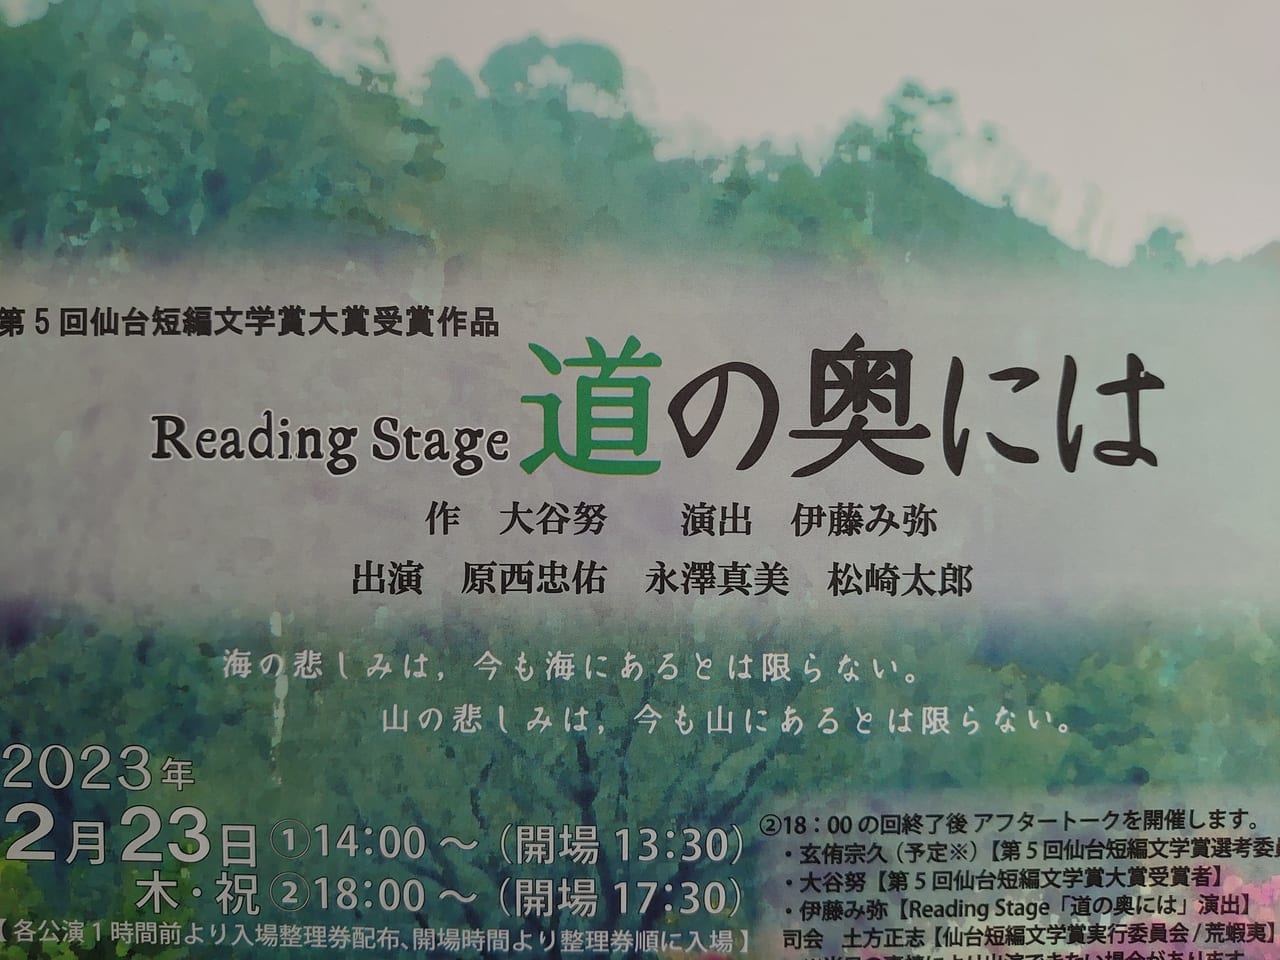 Readeing Stage道の奥には１